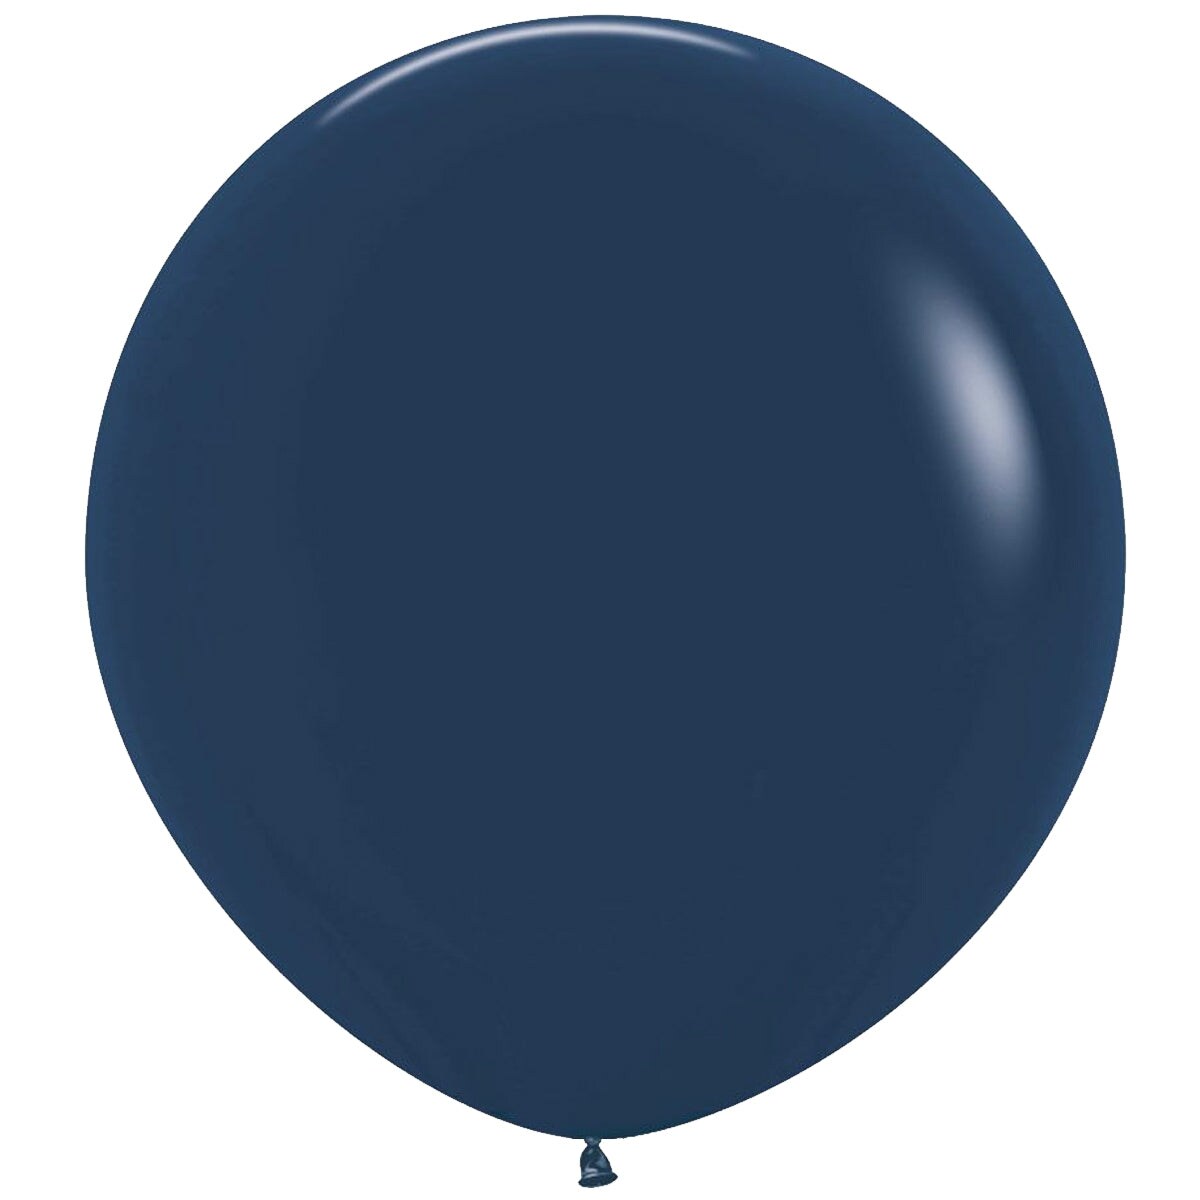 Wrapables 18 Inch Latex Balloons (10 Pack), Navy